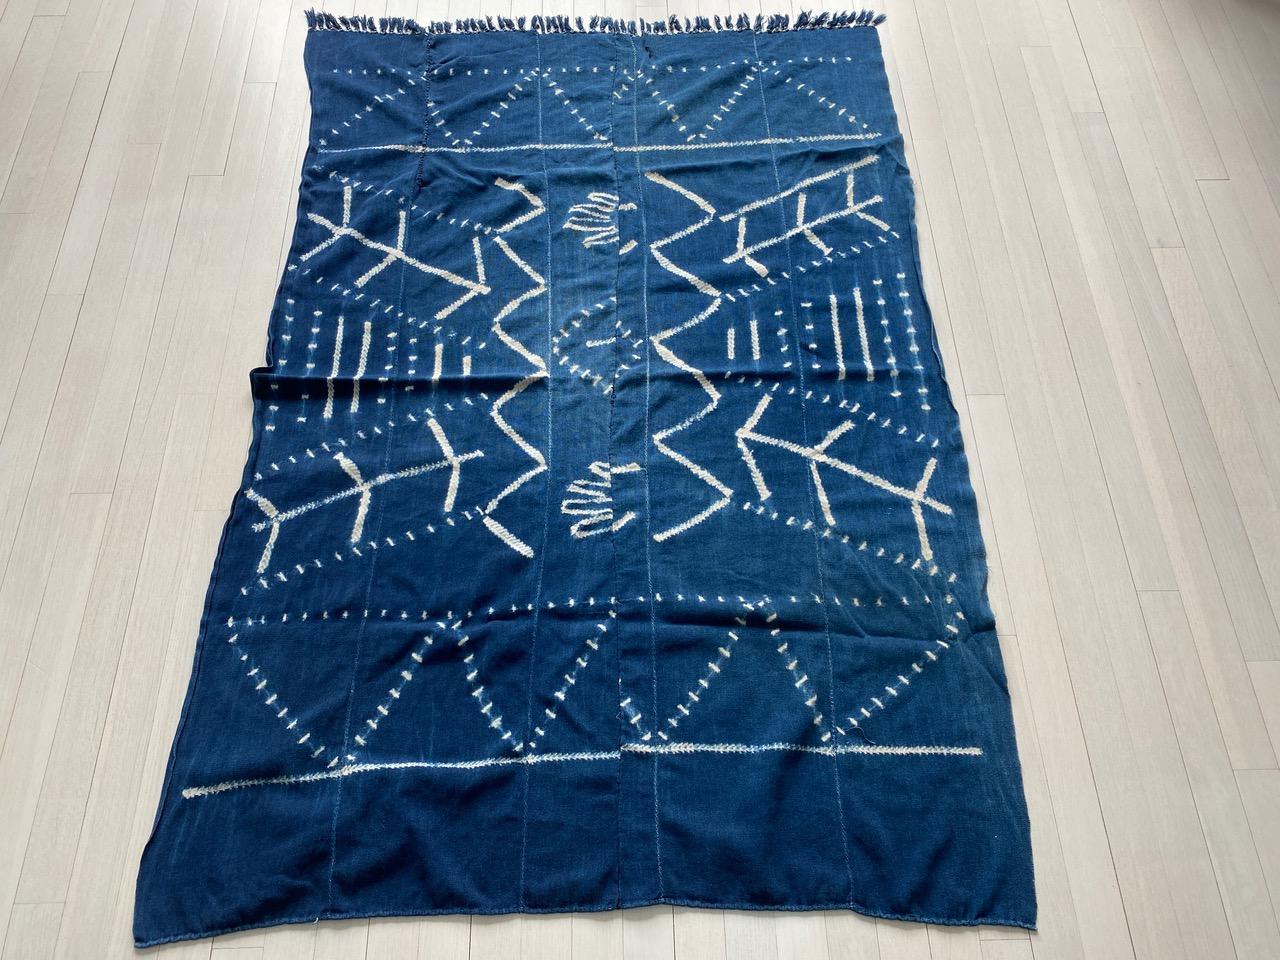 African Mali indigo textile circa 1950. Handwoven, vegetable dyed cotton. We only select the best.

This soft textile was sourced in the spirit of Wabi-Sabi, a Japanese philosophy that beauty can be found in imperfection and impermanence. It is a